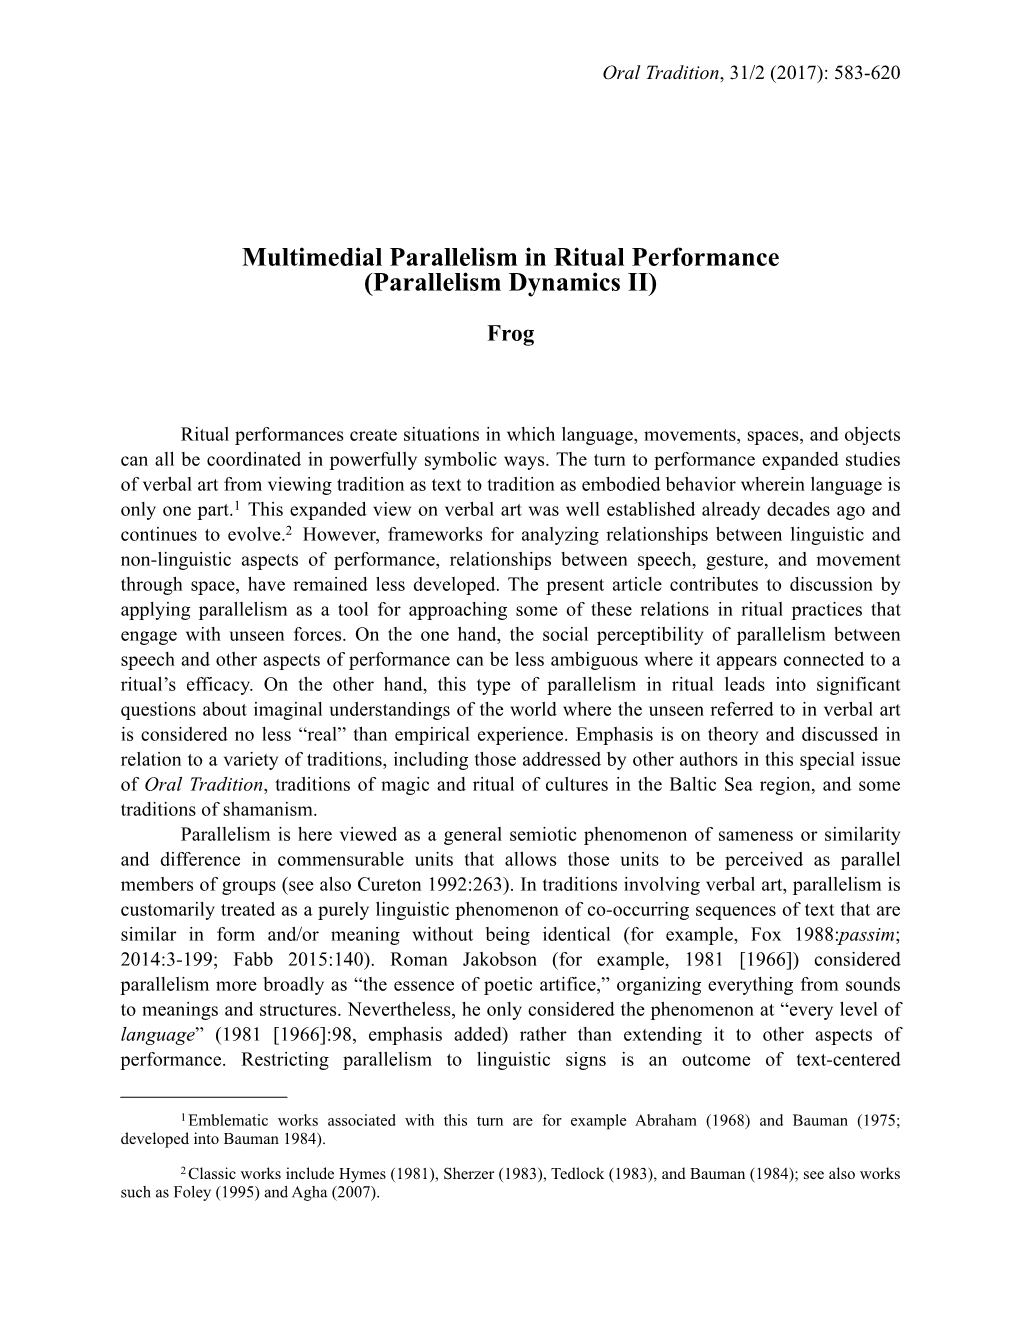 Multimedial Parallelism in Ritual Performance (Parallelism Dynamics II)